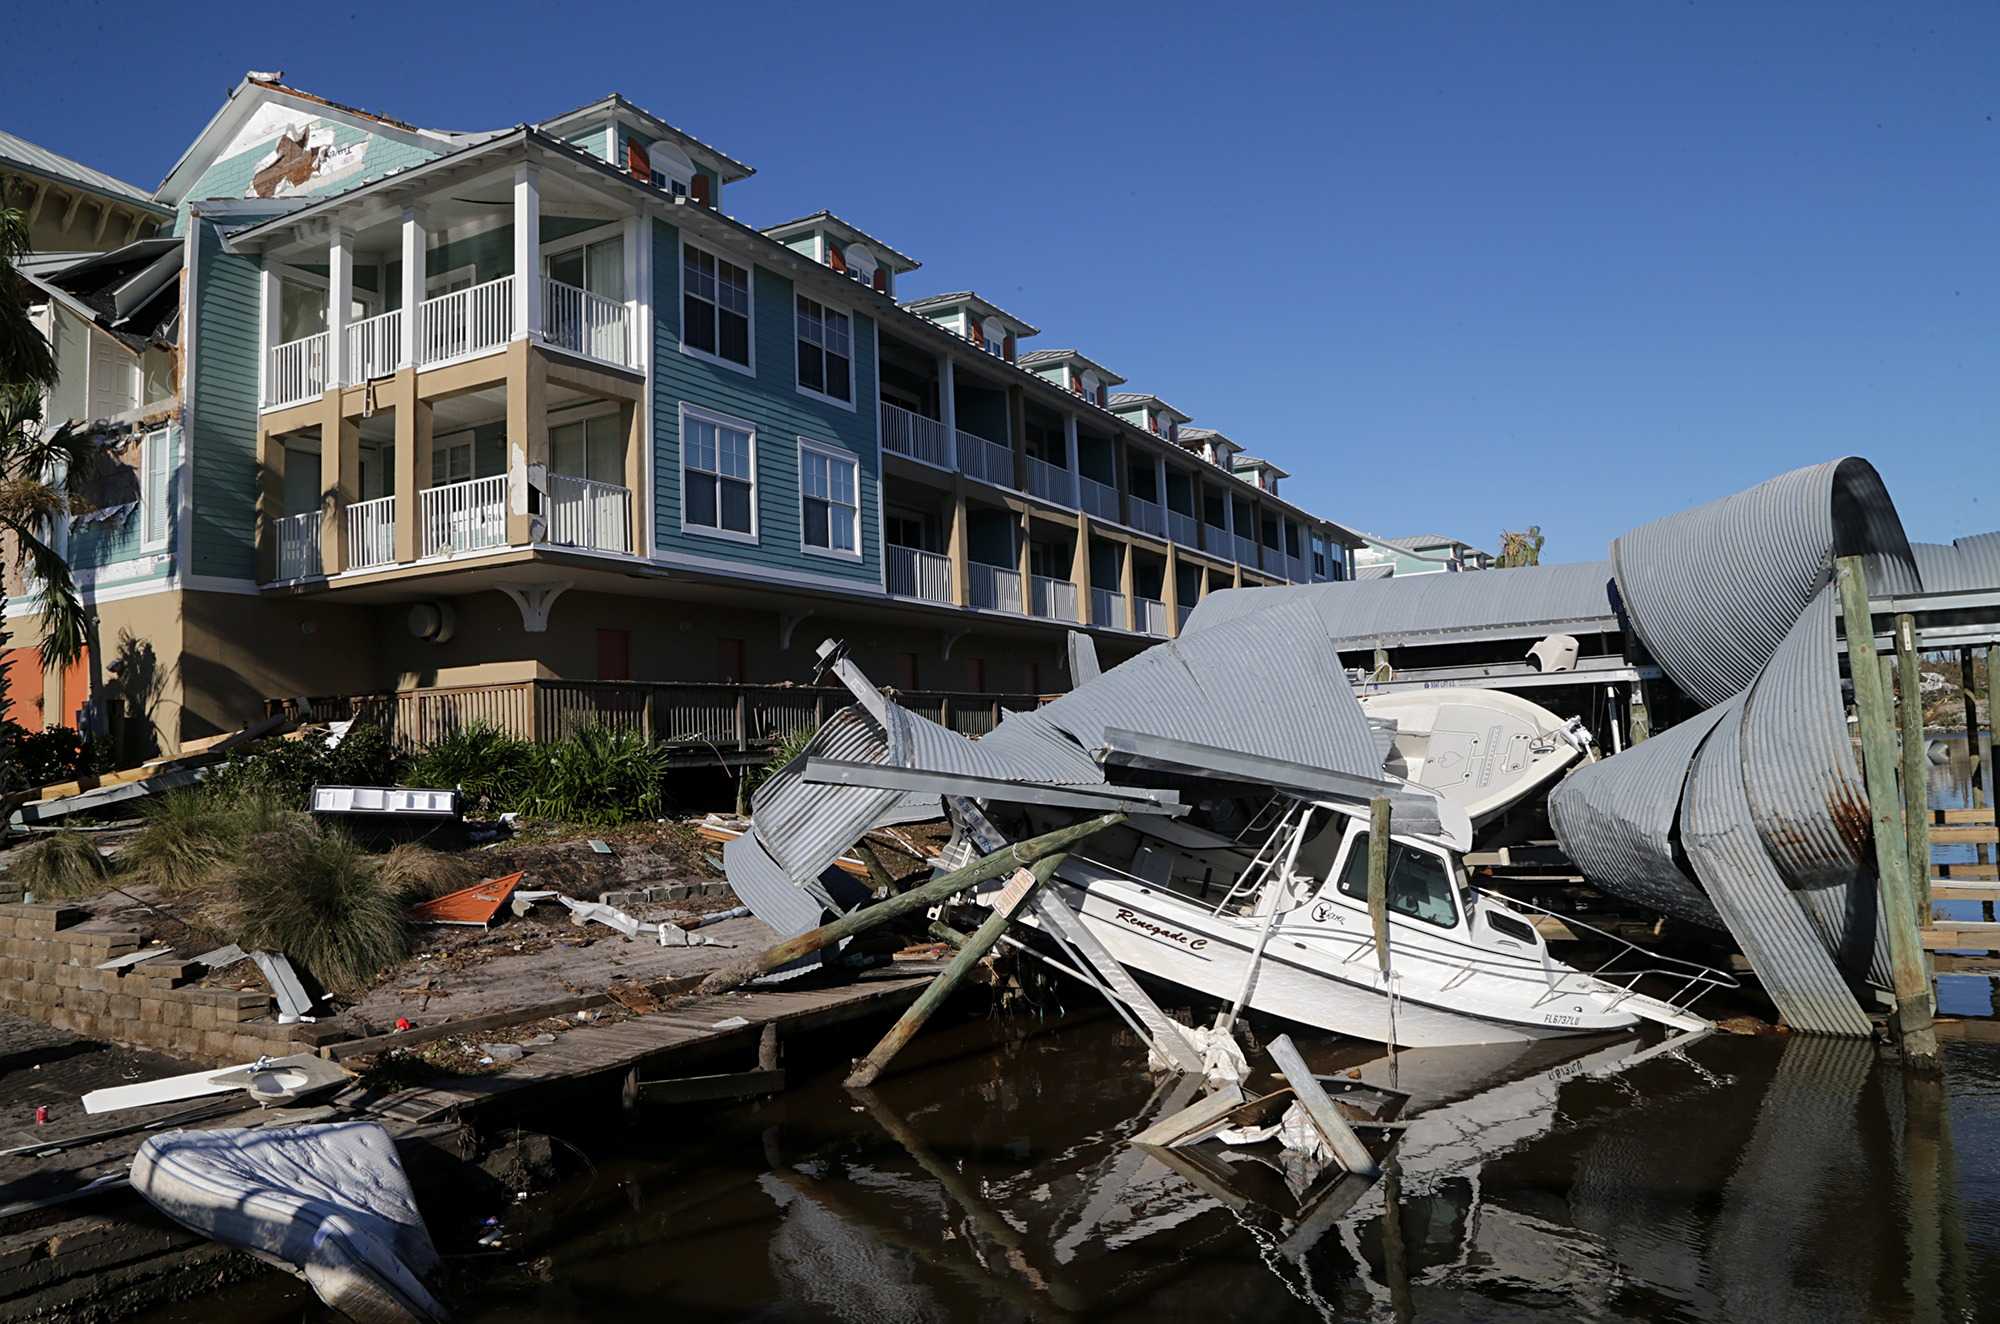 The rubble in Mexico Beach, two days after a Category 4 Hurricane Michael devastated the small coastal town just outside Panama City, Fla., on Friday, Oct. 12, 2018. (Pedro Portal/Miami Herald/TNS)